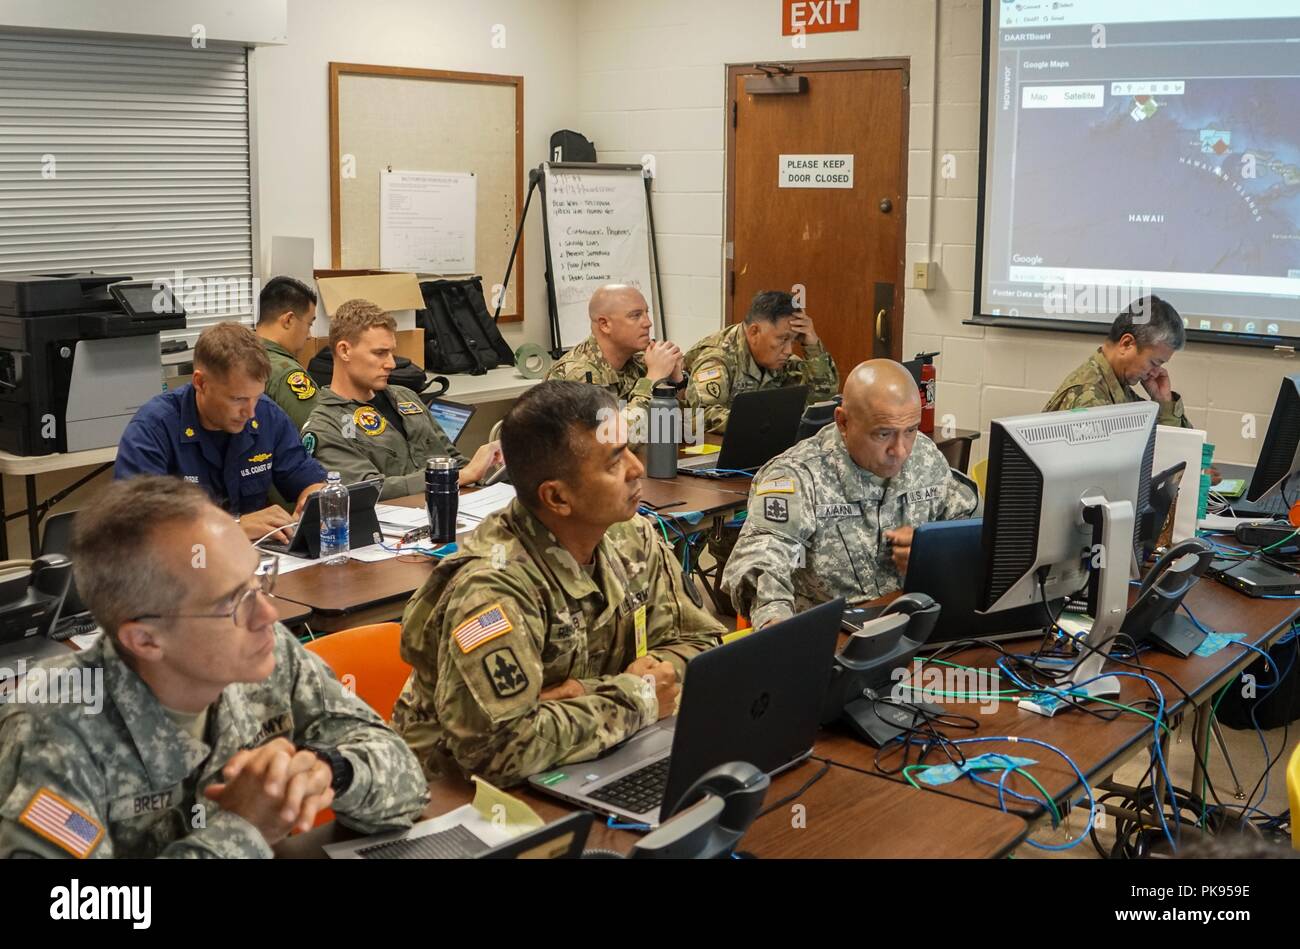 Service members with Joint Task Force 5-0 receive a daily commander's update brief, August 25, 2018 at the Hawaii Army National Guard Center at Diamond Head, Honolulu Hawaii, August 24, 2018. JTF 5-0 is a joint task force led by a dual status commander that is established to respond to the effects of Hurricane Lane on the state of Hawaii. The members of the task force remain committed to monitoring the effects and incidents across the state of Hawaii to respond to any requests made by Local and state authorities through FEMA. () Stock Photo